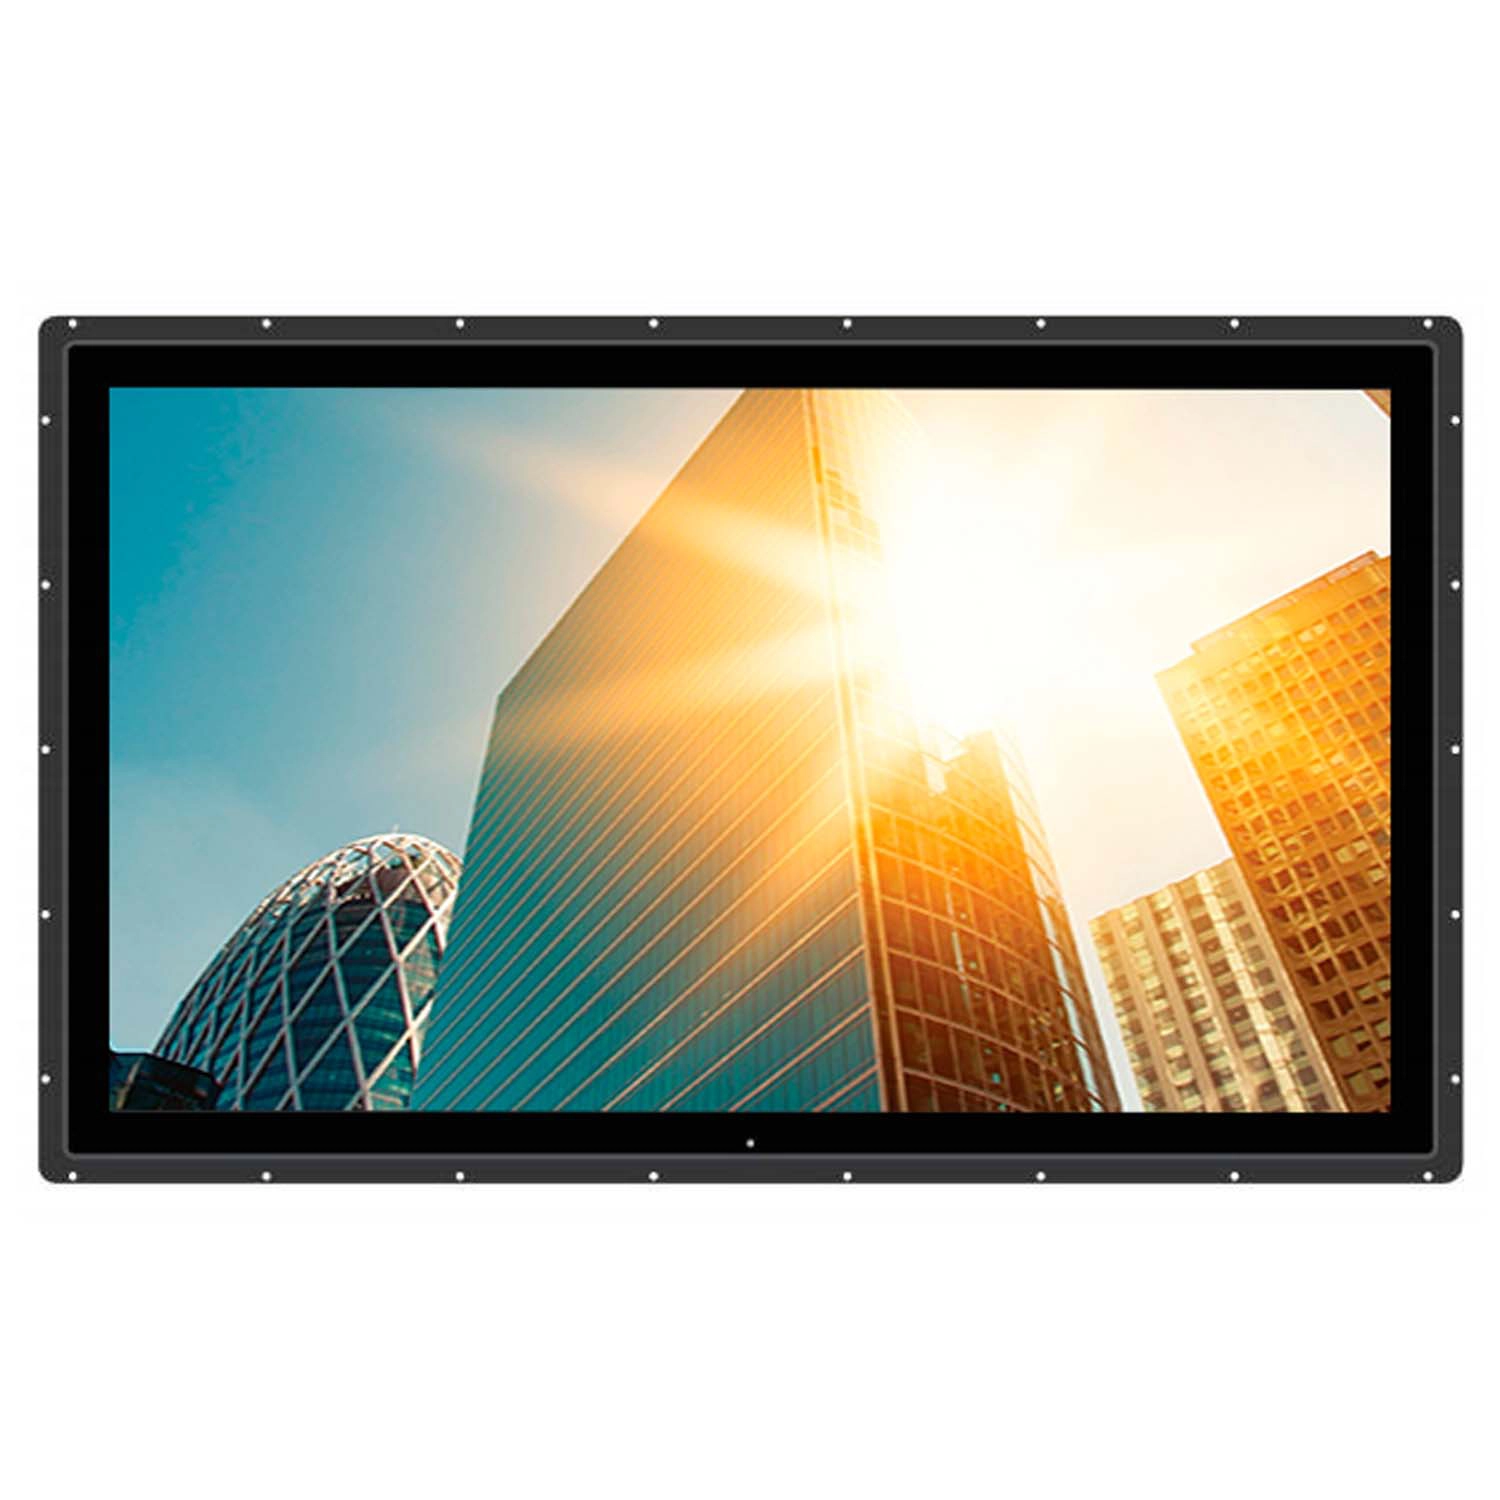 INDUSTRIAL OPEN FRAME HIGH BRIGHT TOUCH MONITOR KEETOUCH 55" KT-550-CHWSGF2